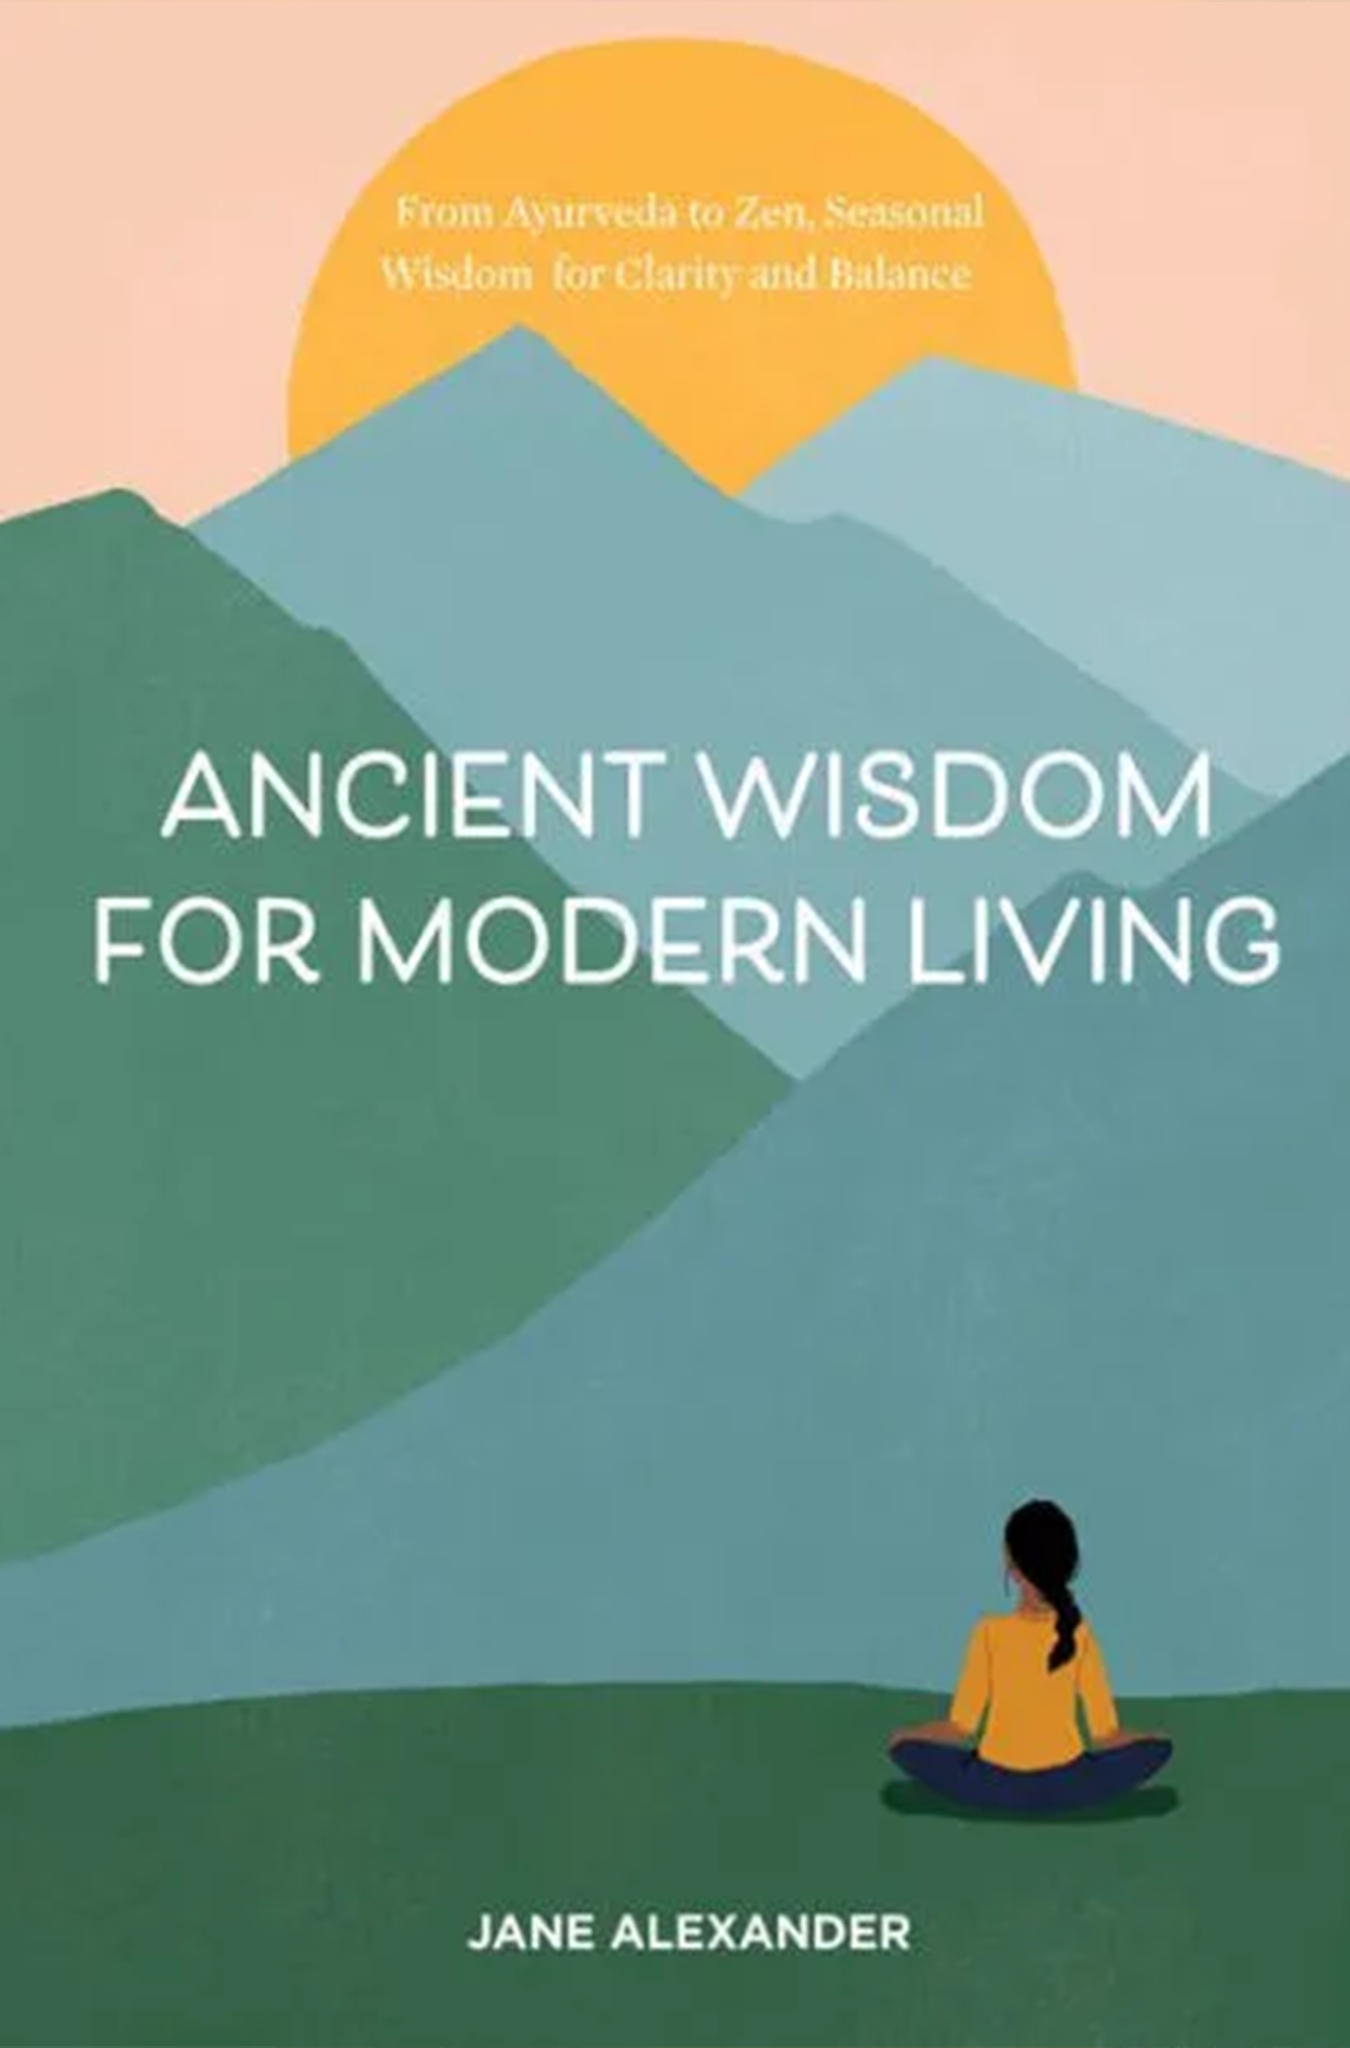 ANCIENT WISDOM FOR MODERN LIVING: FROM AYURVEDA TO ZEN, SEASONAL WISDOM FOR CLARITY AND BALANCE